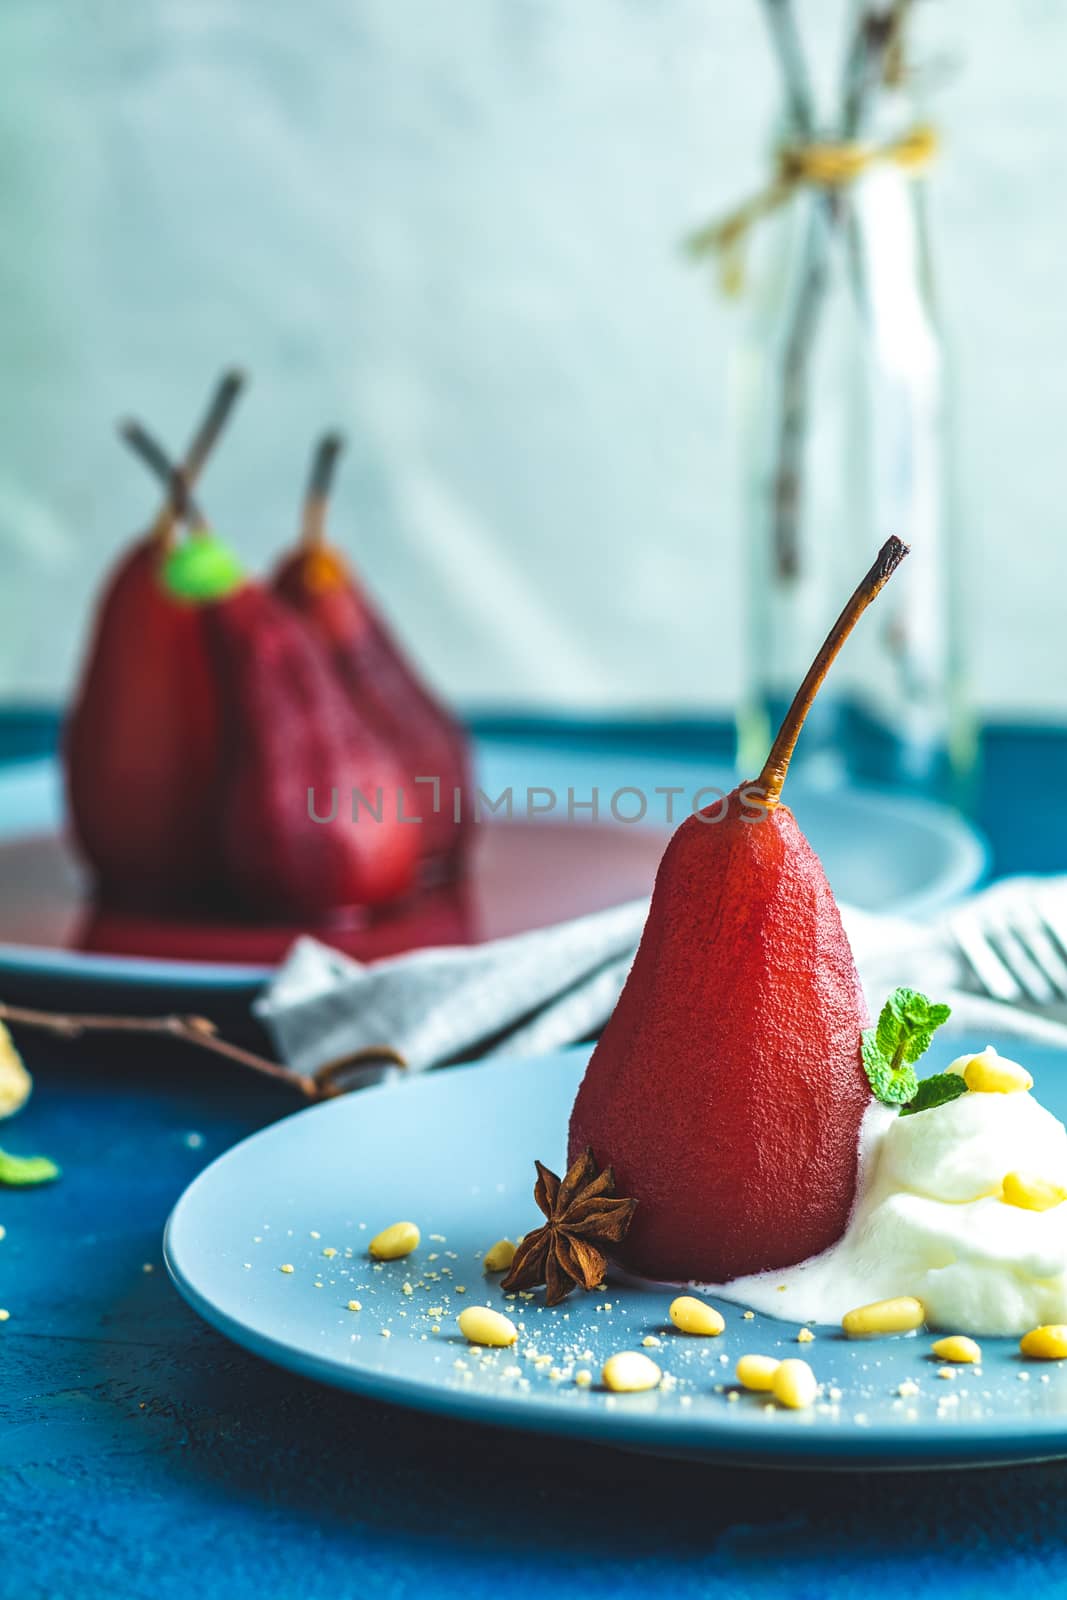 Pears in wine. Traditional dessert pears stewed in red wine with wine sauce on plate on blue concrete surface. Concept for romantic dinner dessert